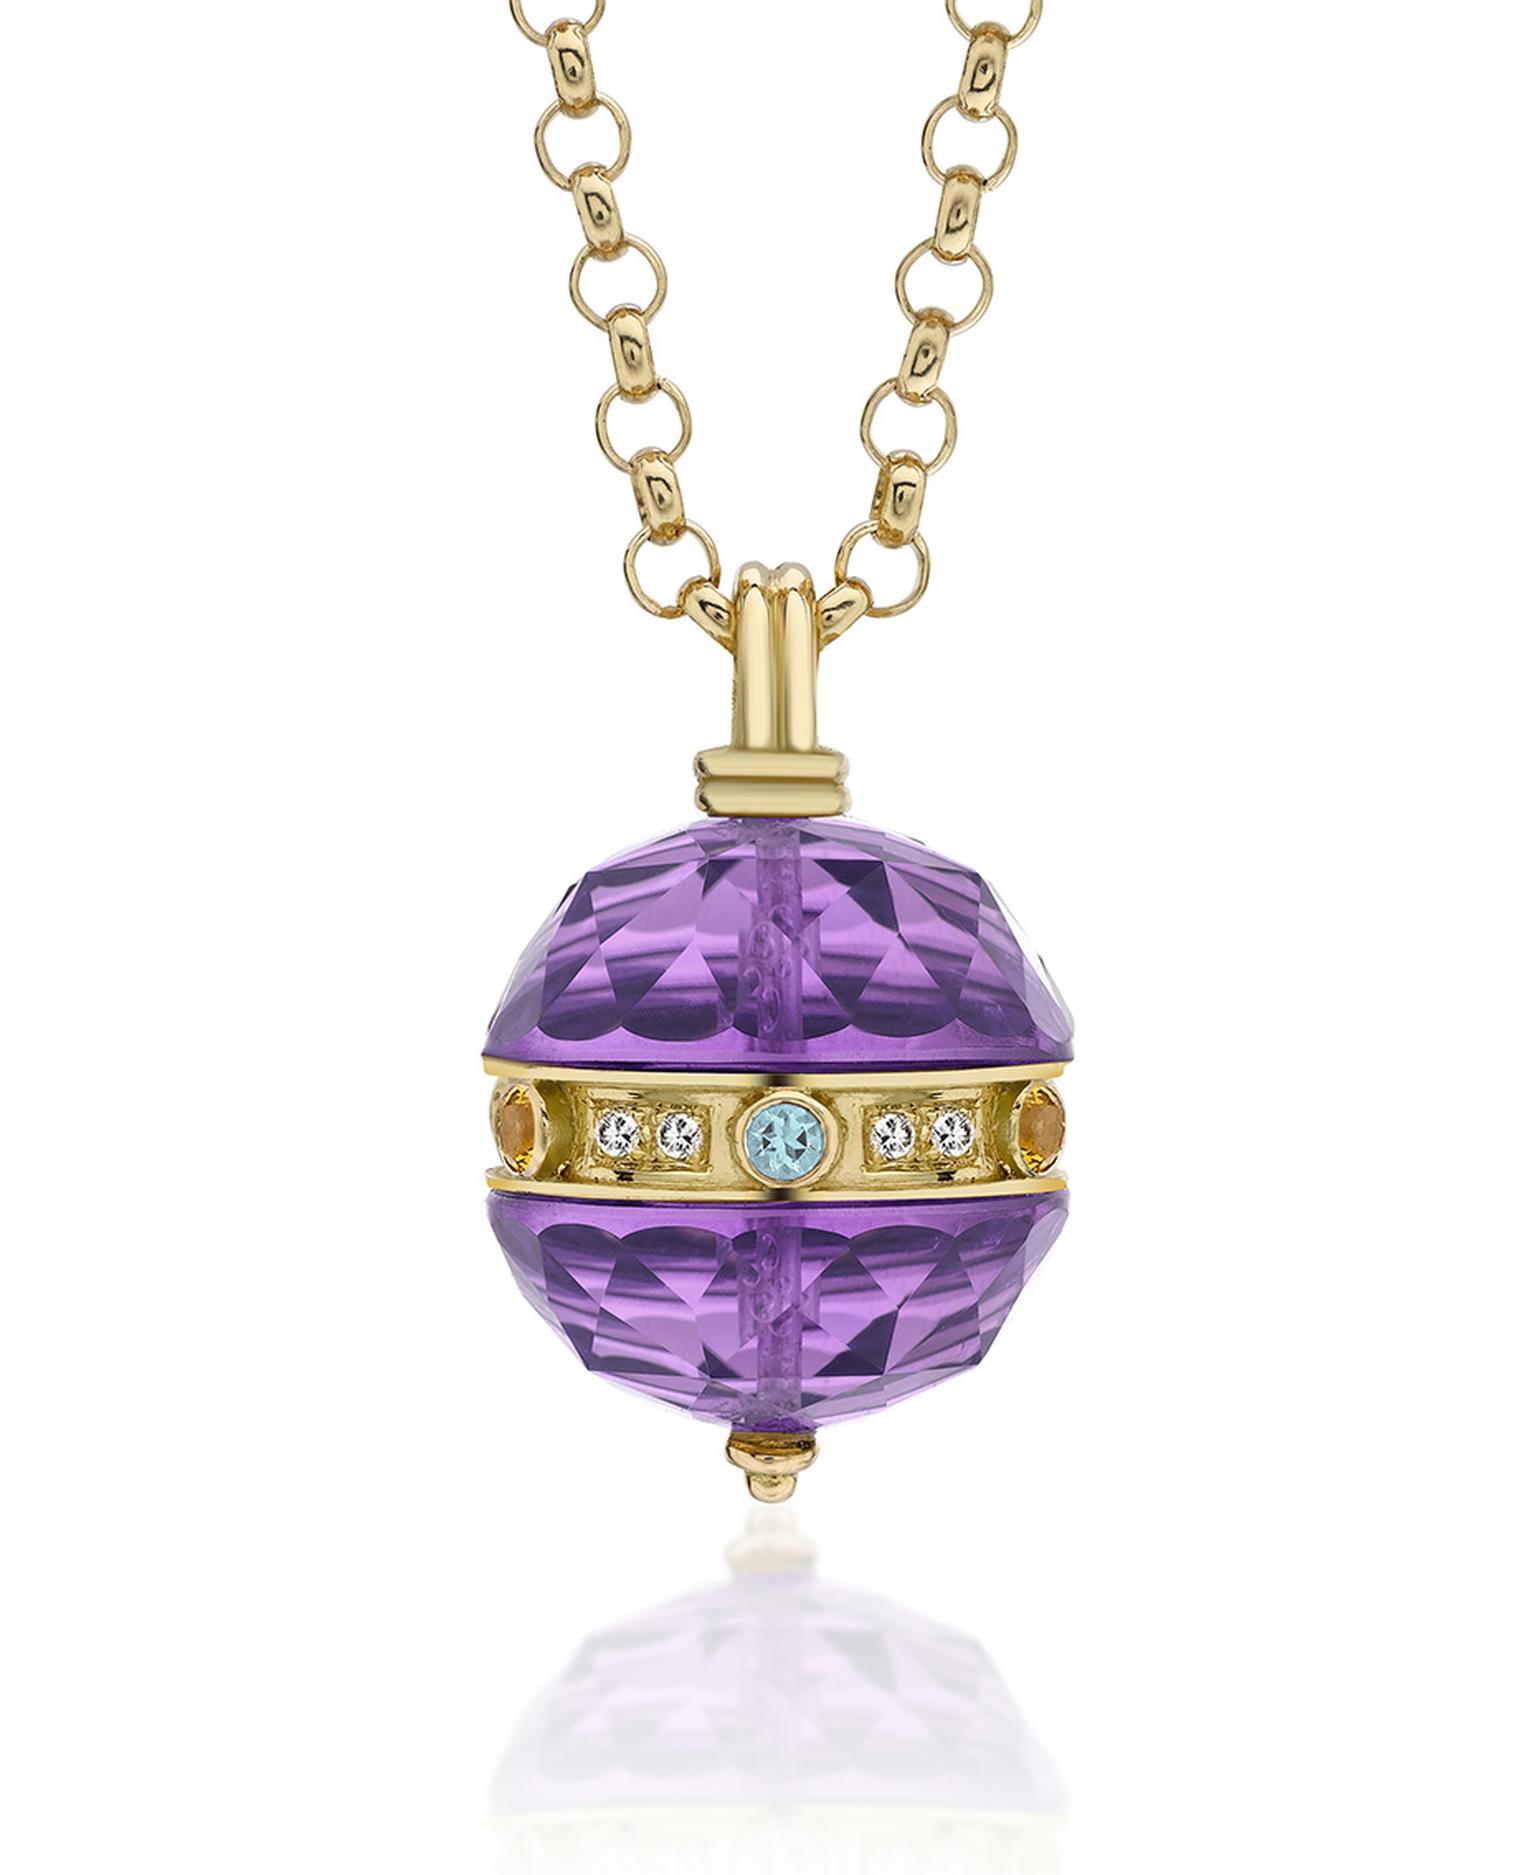 The glossy ripeness of purple quartz is fuelling the desirability of amethyst jewellery